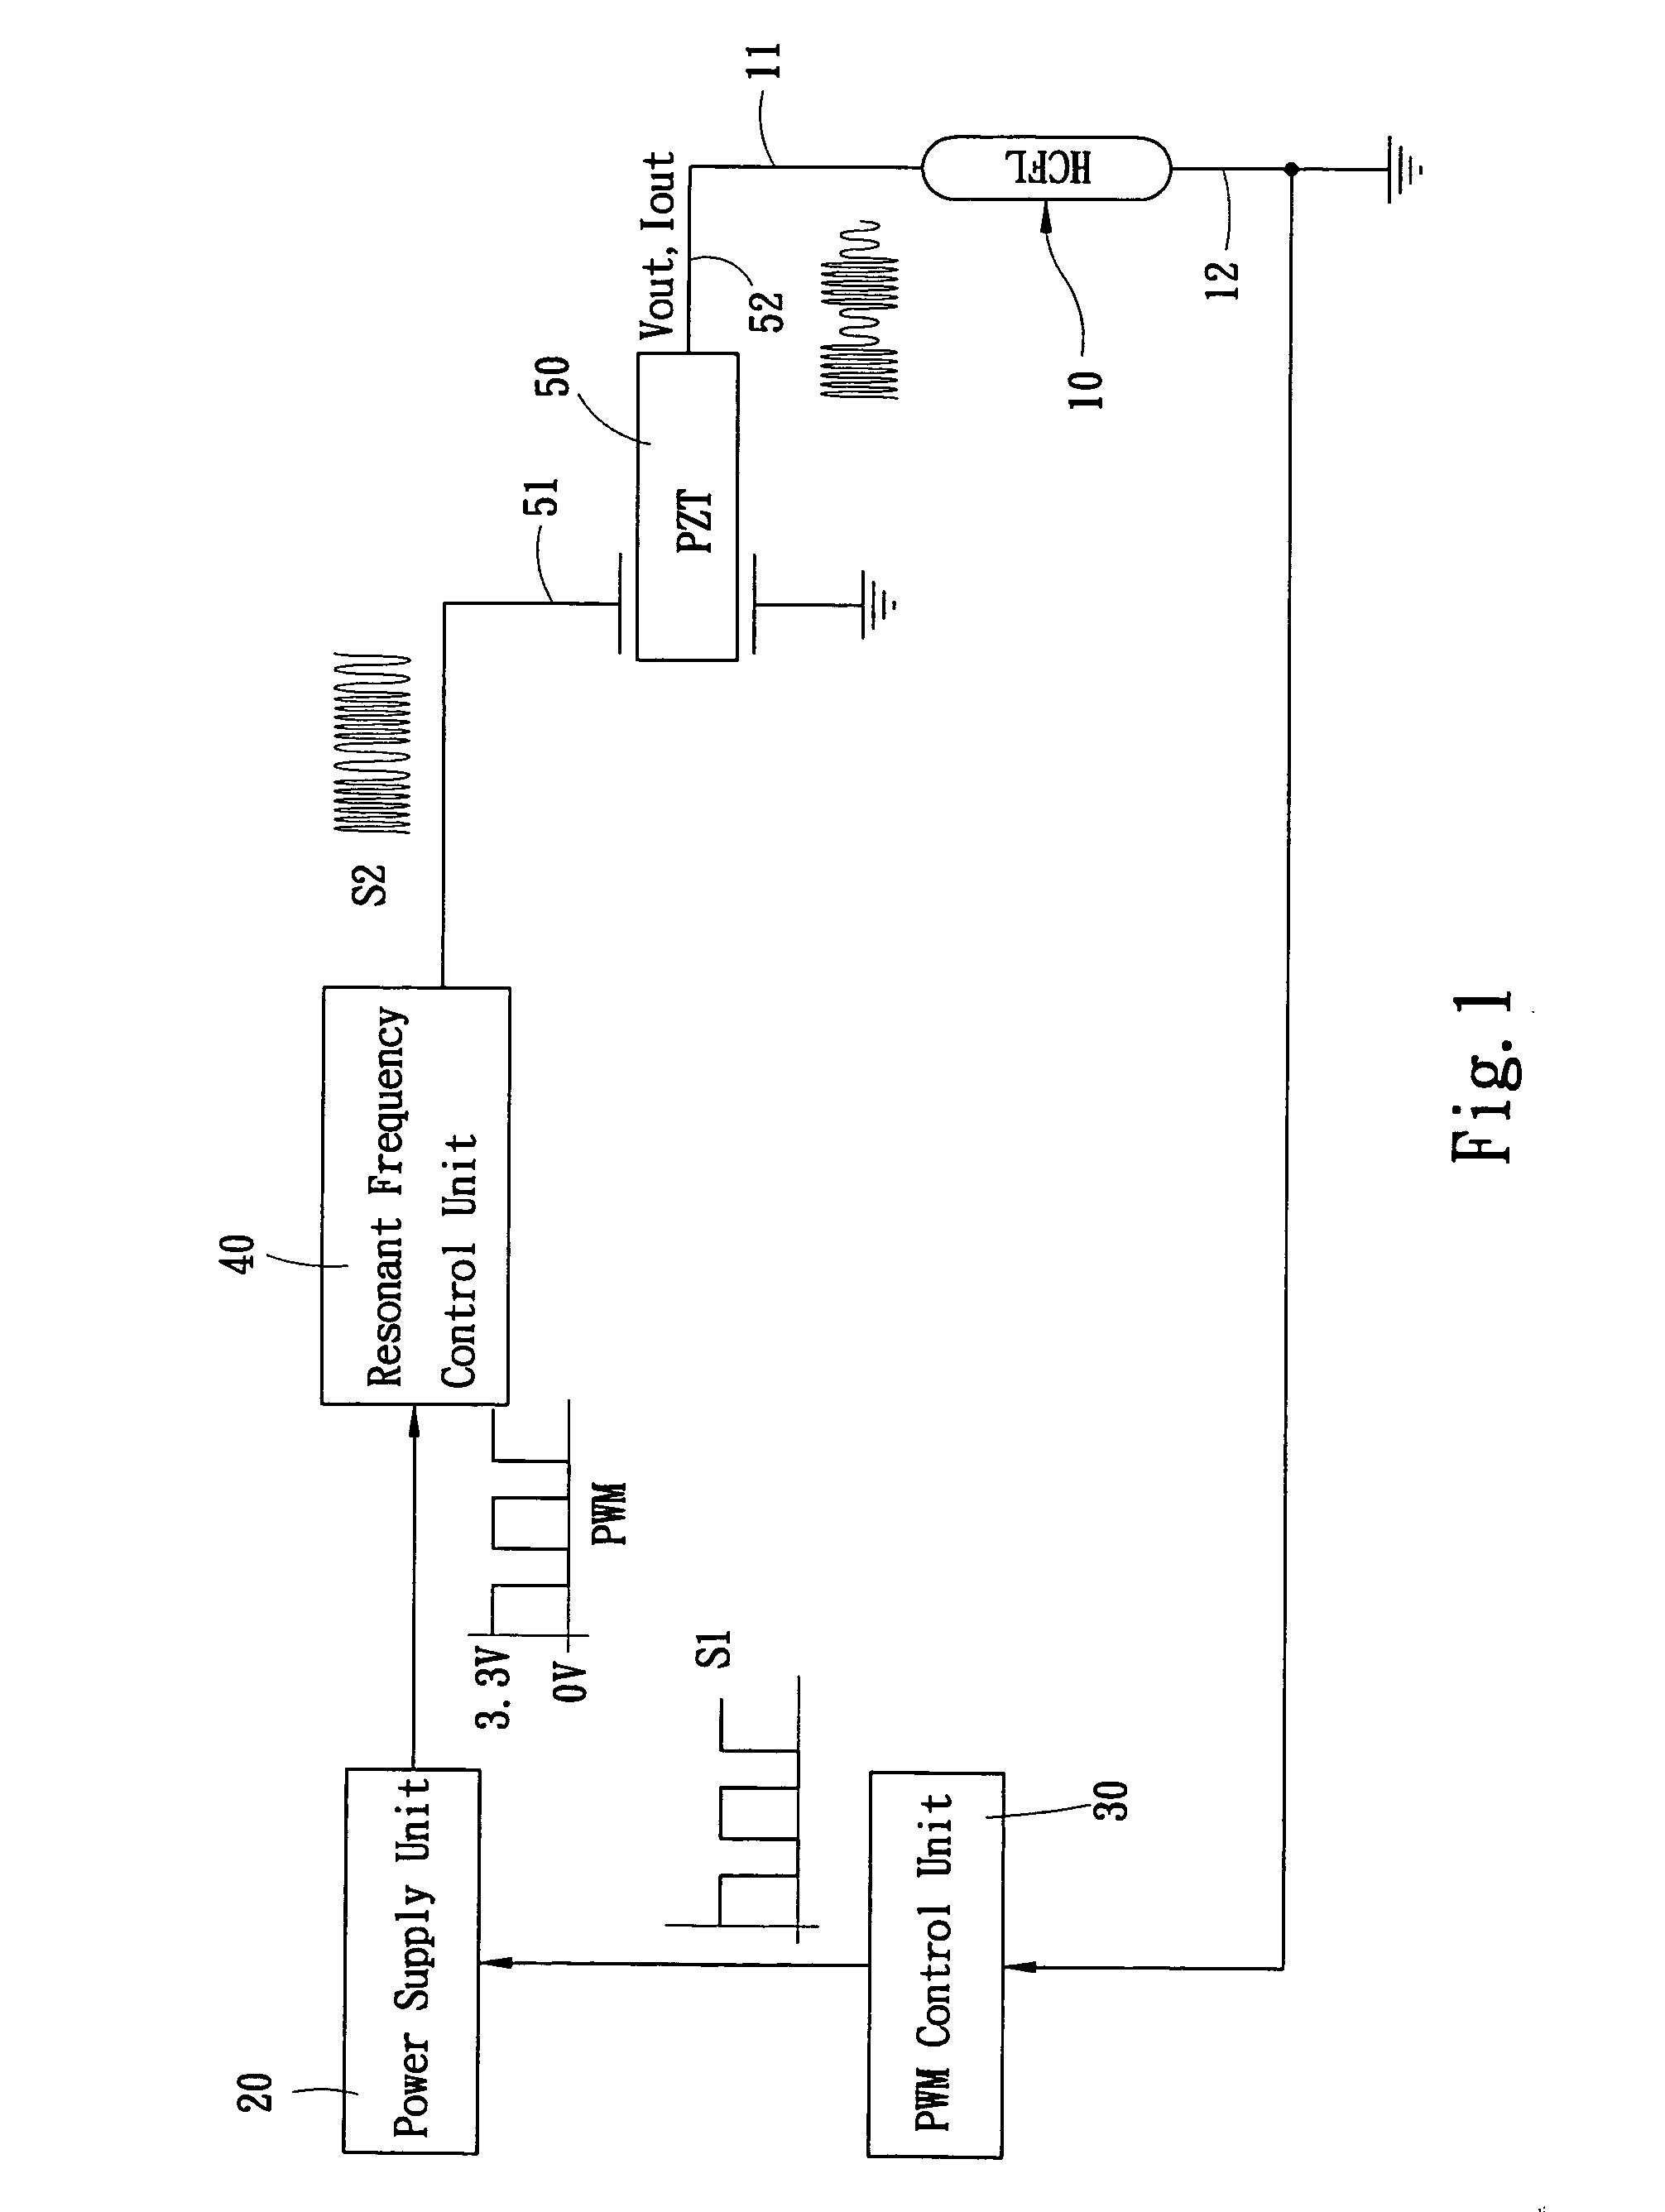 Method and apparatus for dimming hot cathode fluorescent lamp